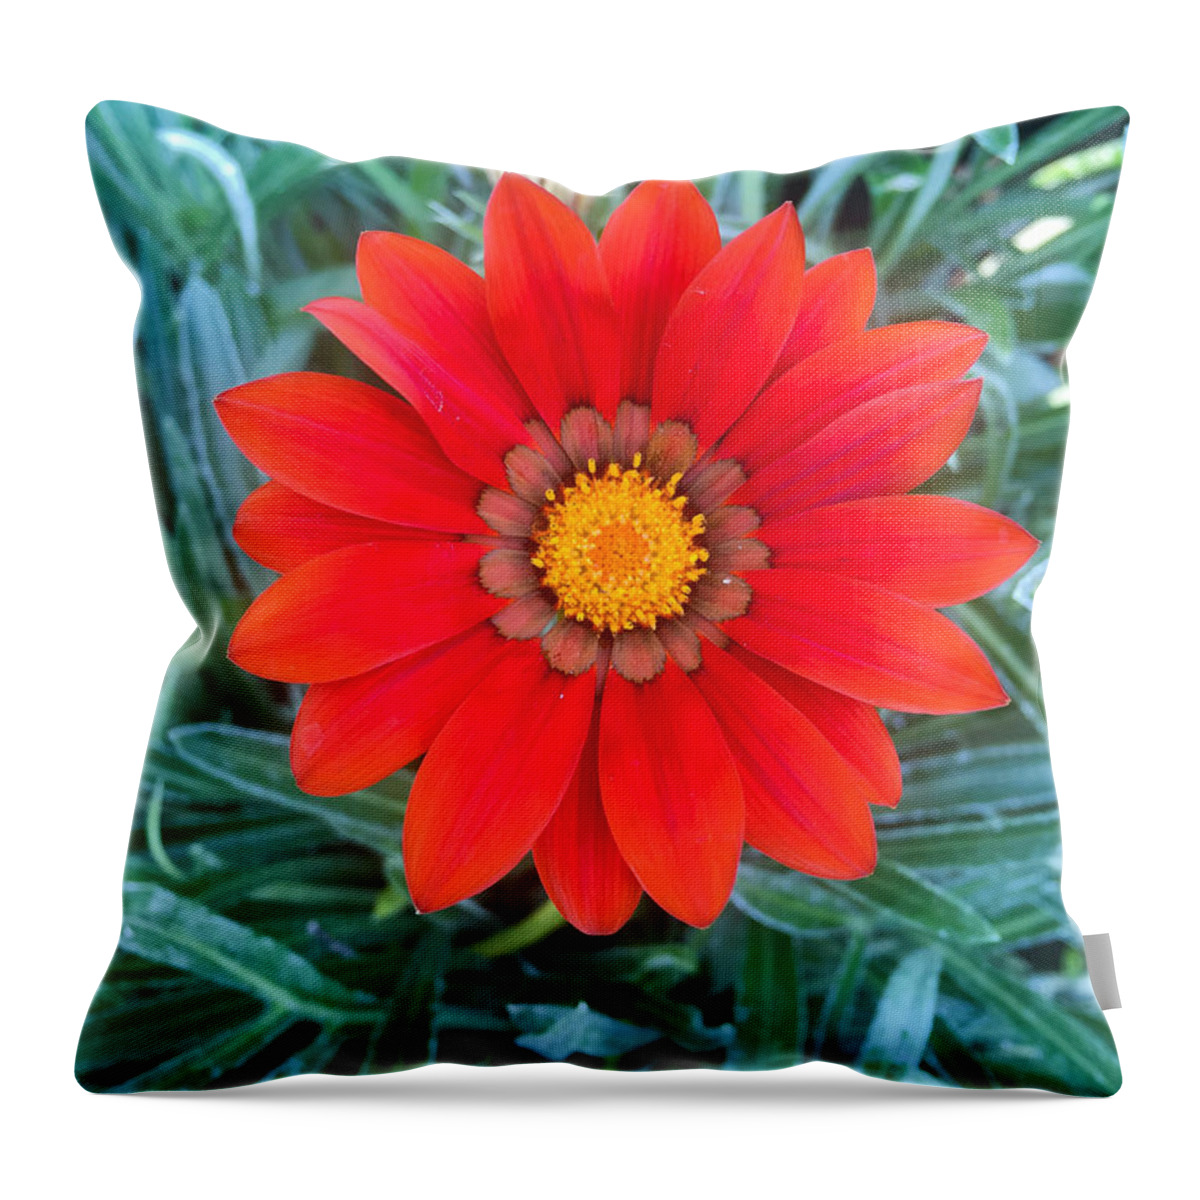 Msu Throw Pillow featuring the photograph Red Intensity by Joseph Yarbrough